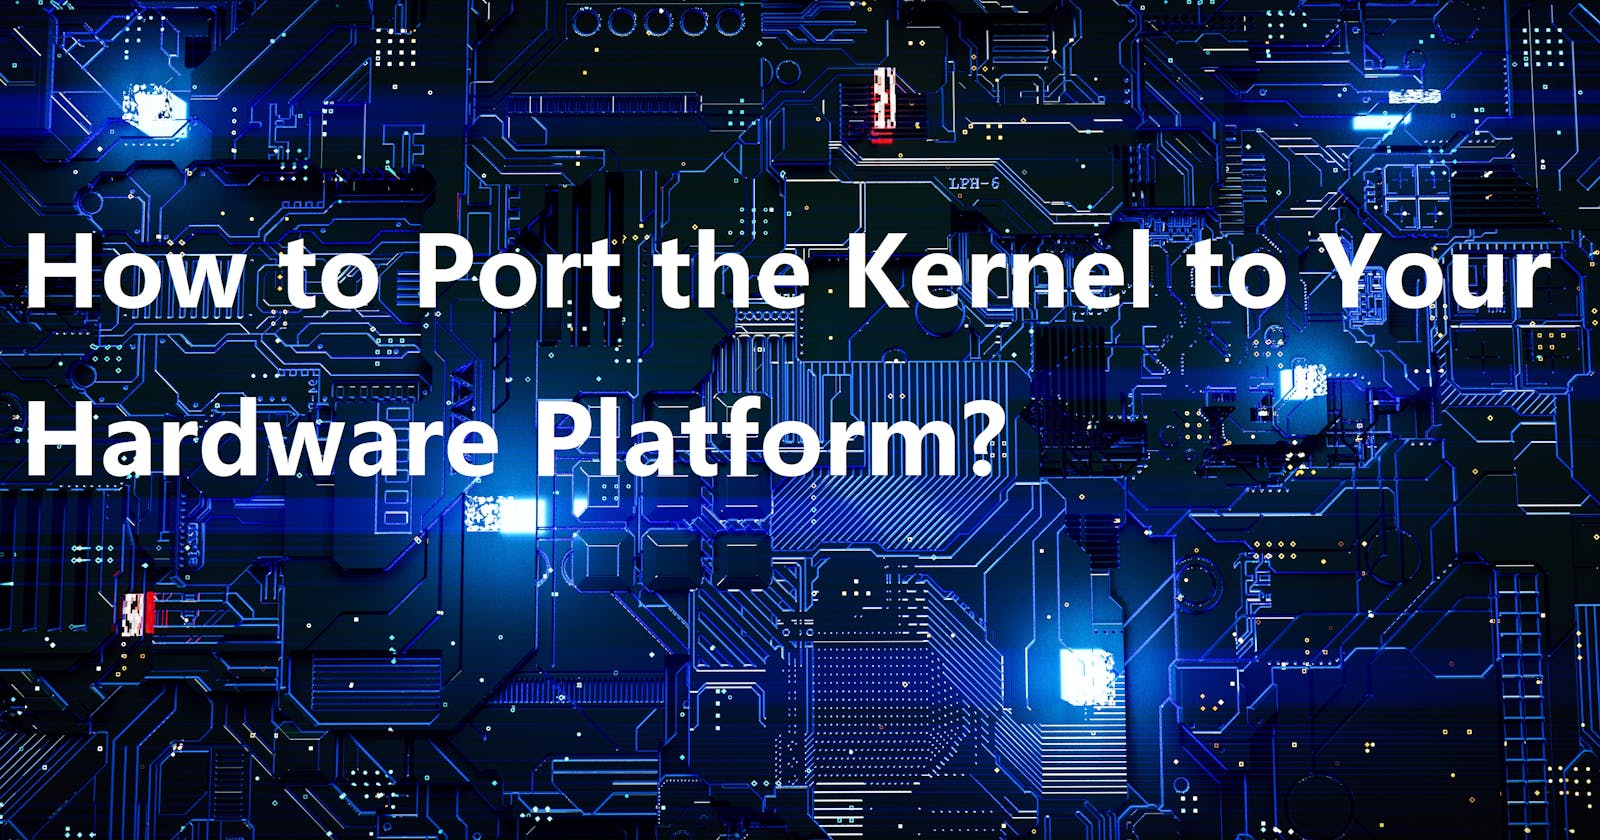 How to Port the Kernel to Your Hardware Platform?